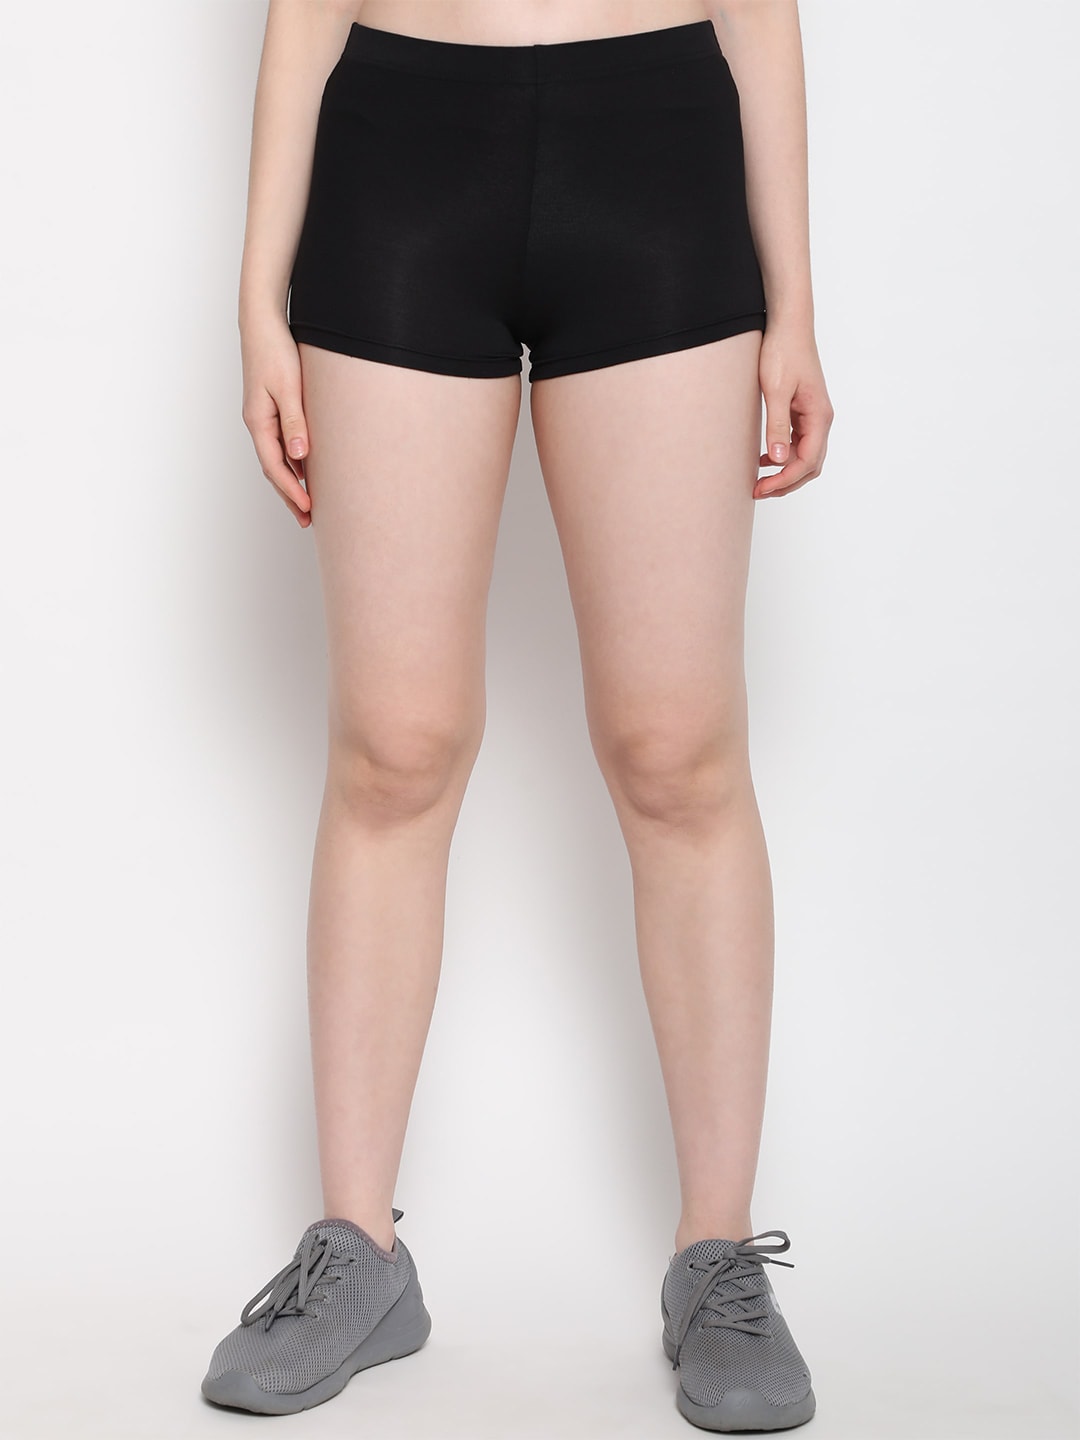 Outflits Women Black Skinny Fit High-Rise Cycling Hot Pants Shorts Price in India